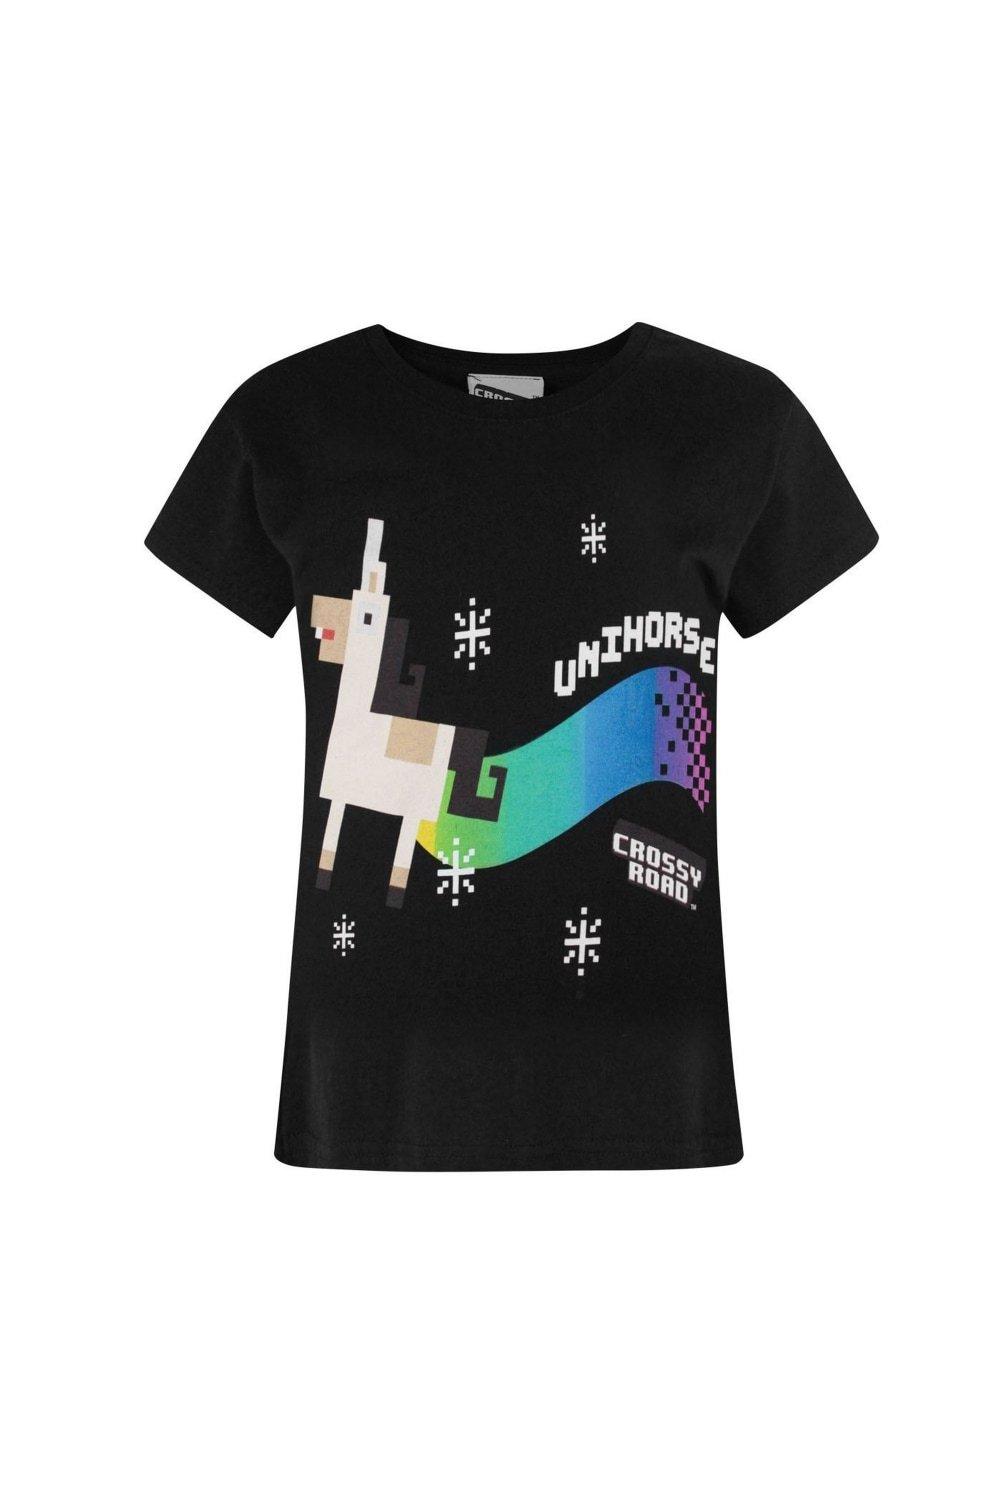 Crossy Road Official Unihorse Short Sleeved T-Shirt